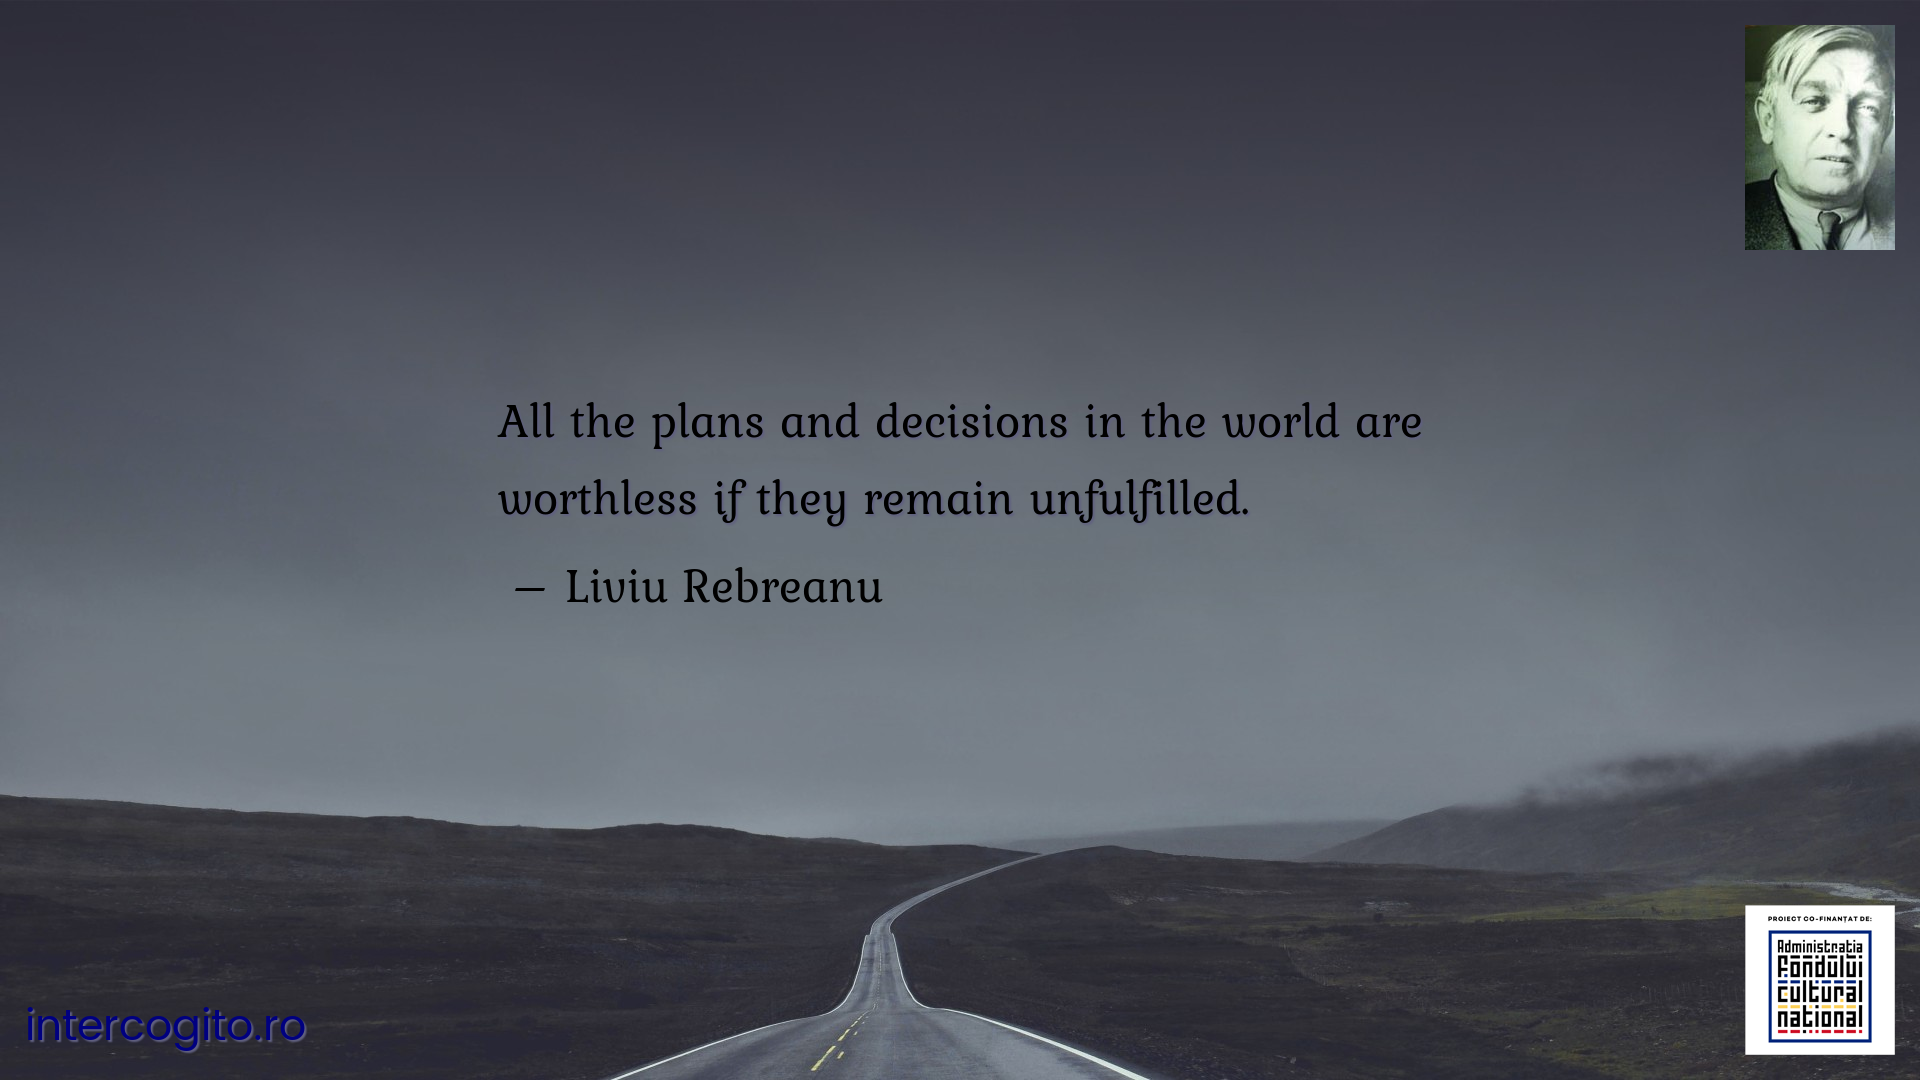 All the plans and decisions in the world are worthless if they remain unfulfilled.